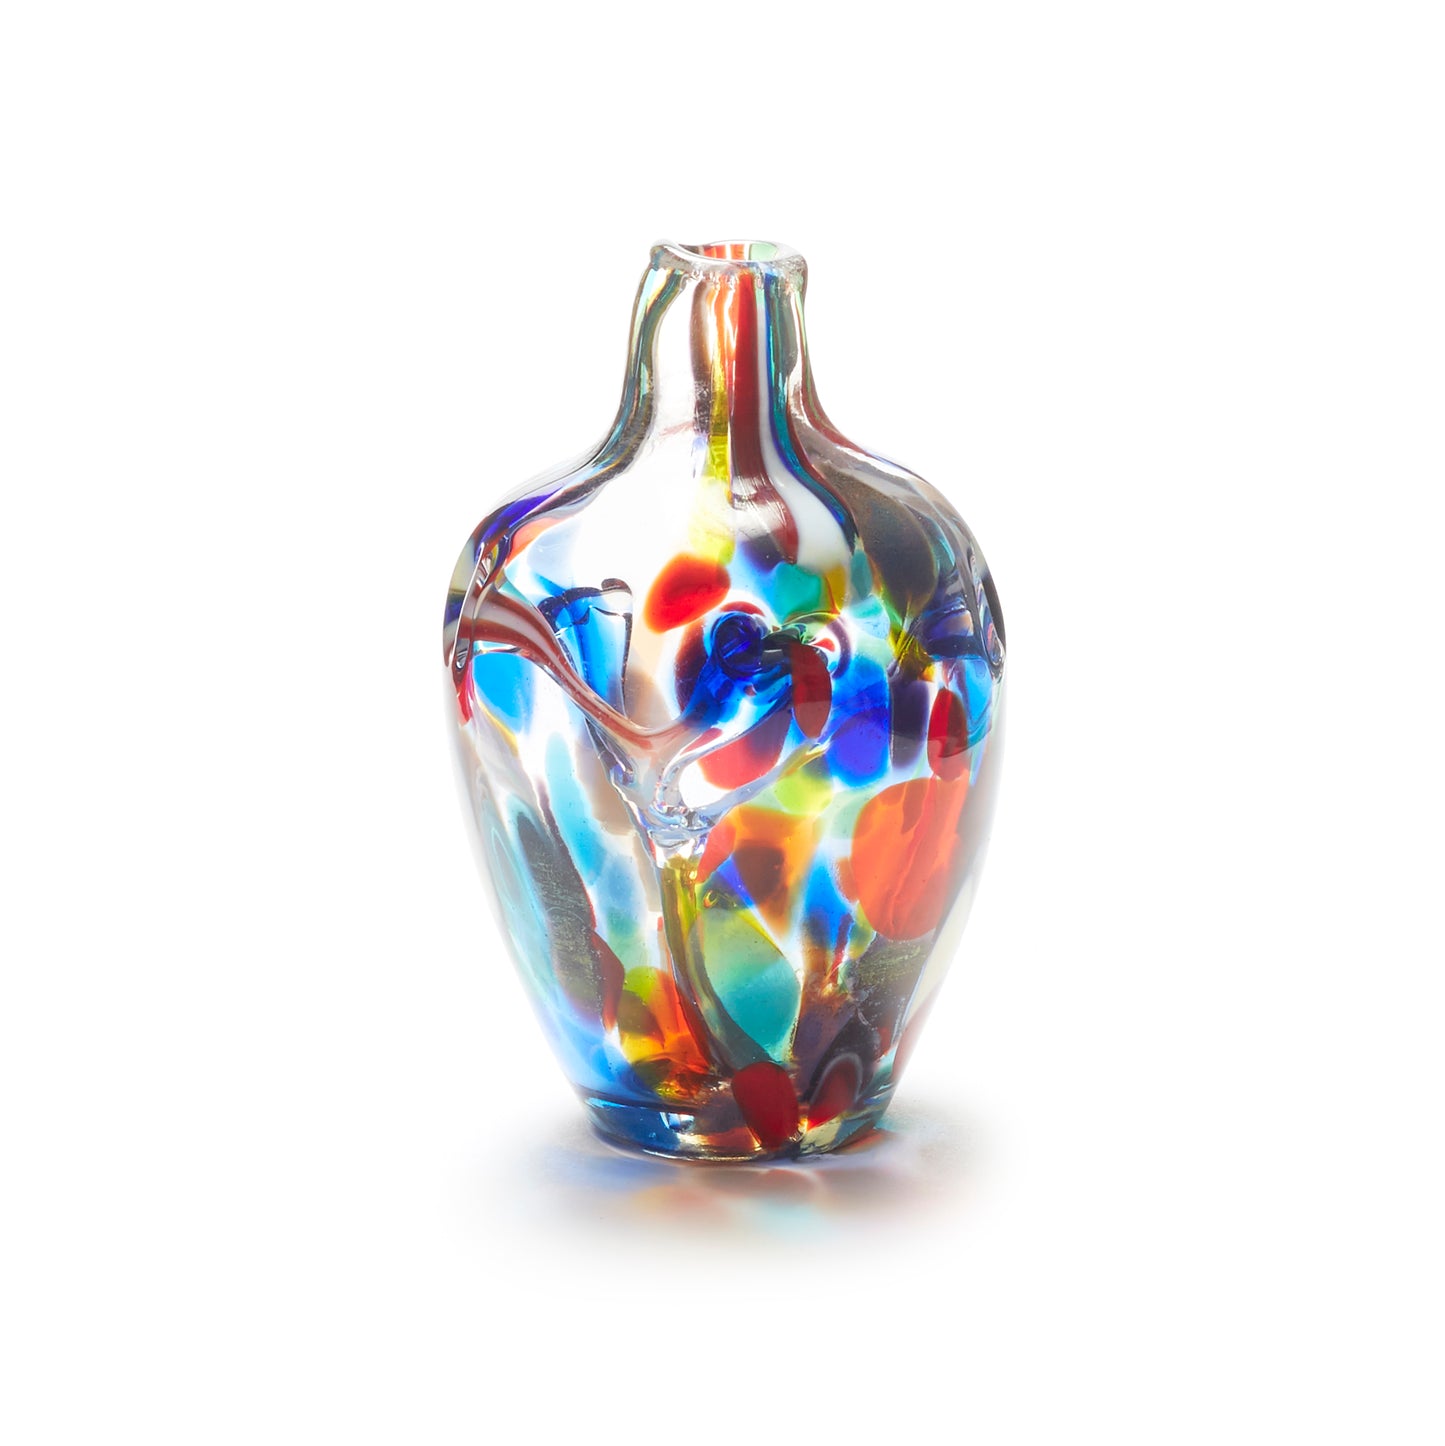 Miniature hand blown glass vase. Purple, blue, yellow, red, orange, green, and white glass. Colour combination is called "Multi."